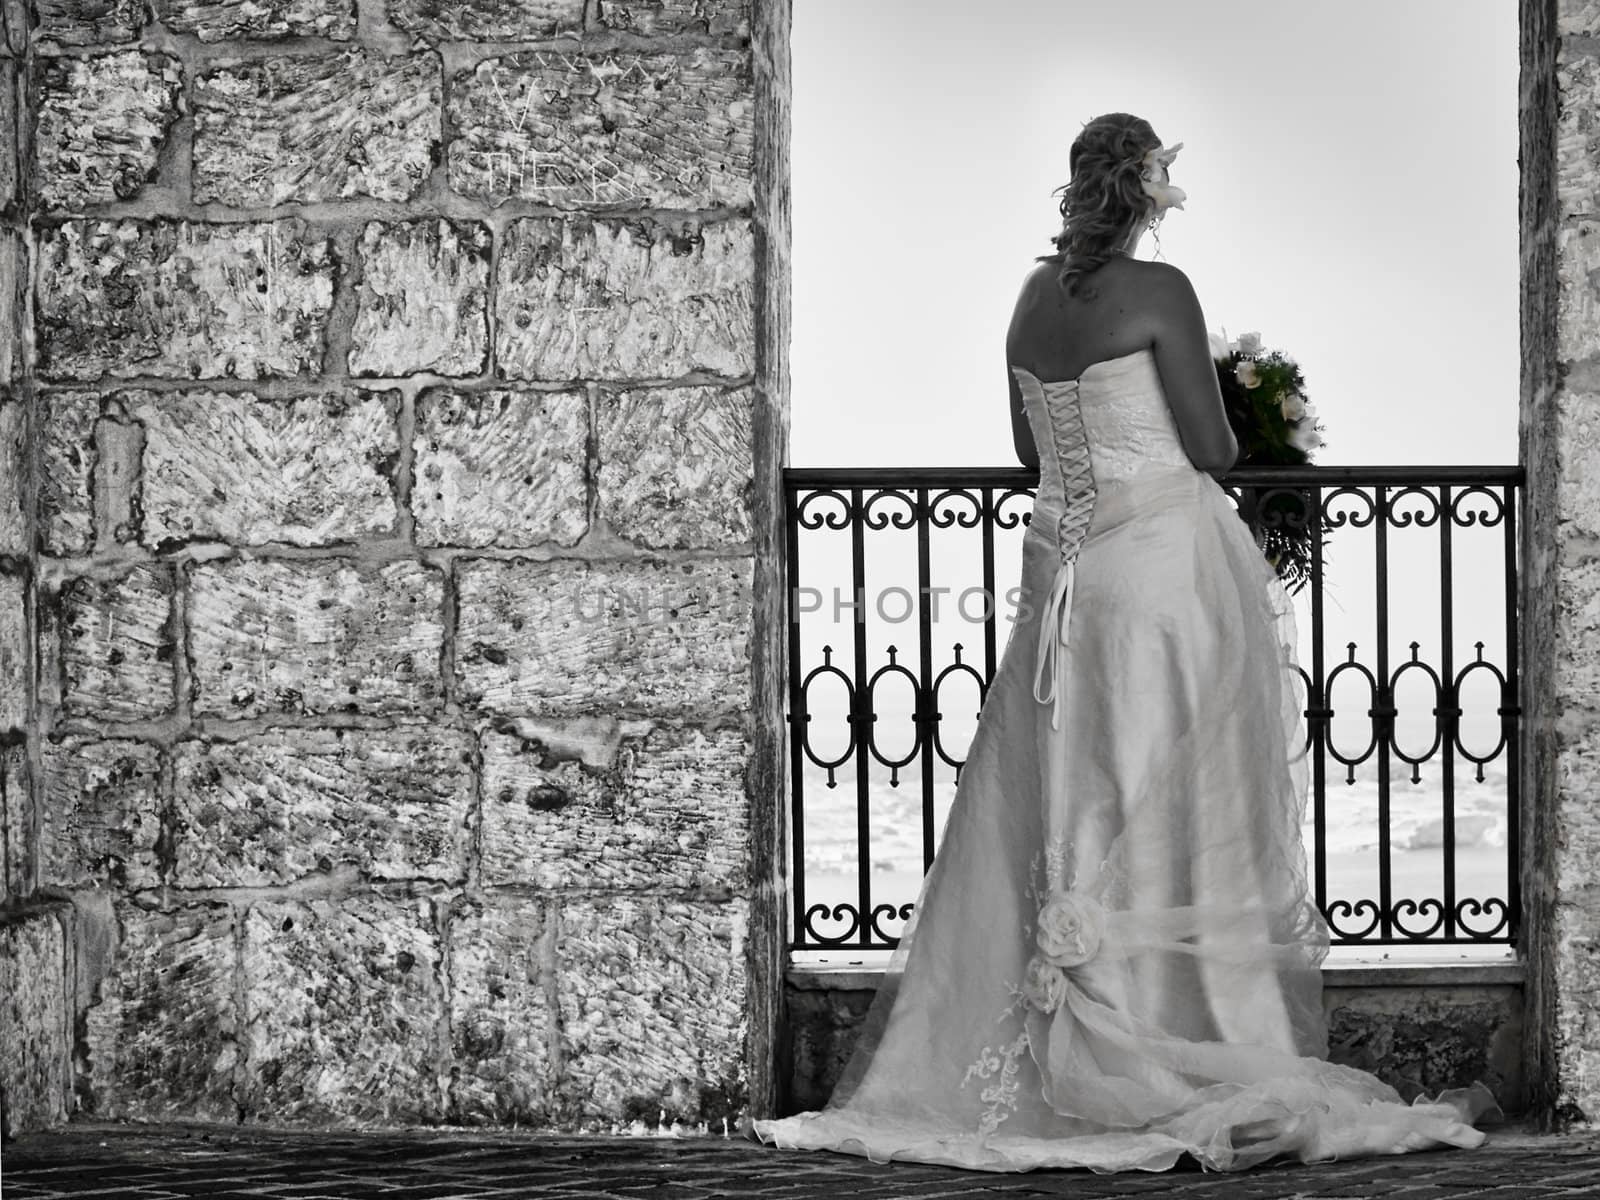 A newly wed bride in a medieval balcony overlooking Mellieha Bay in Malta